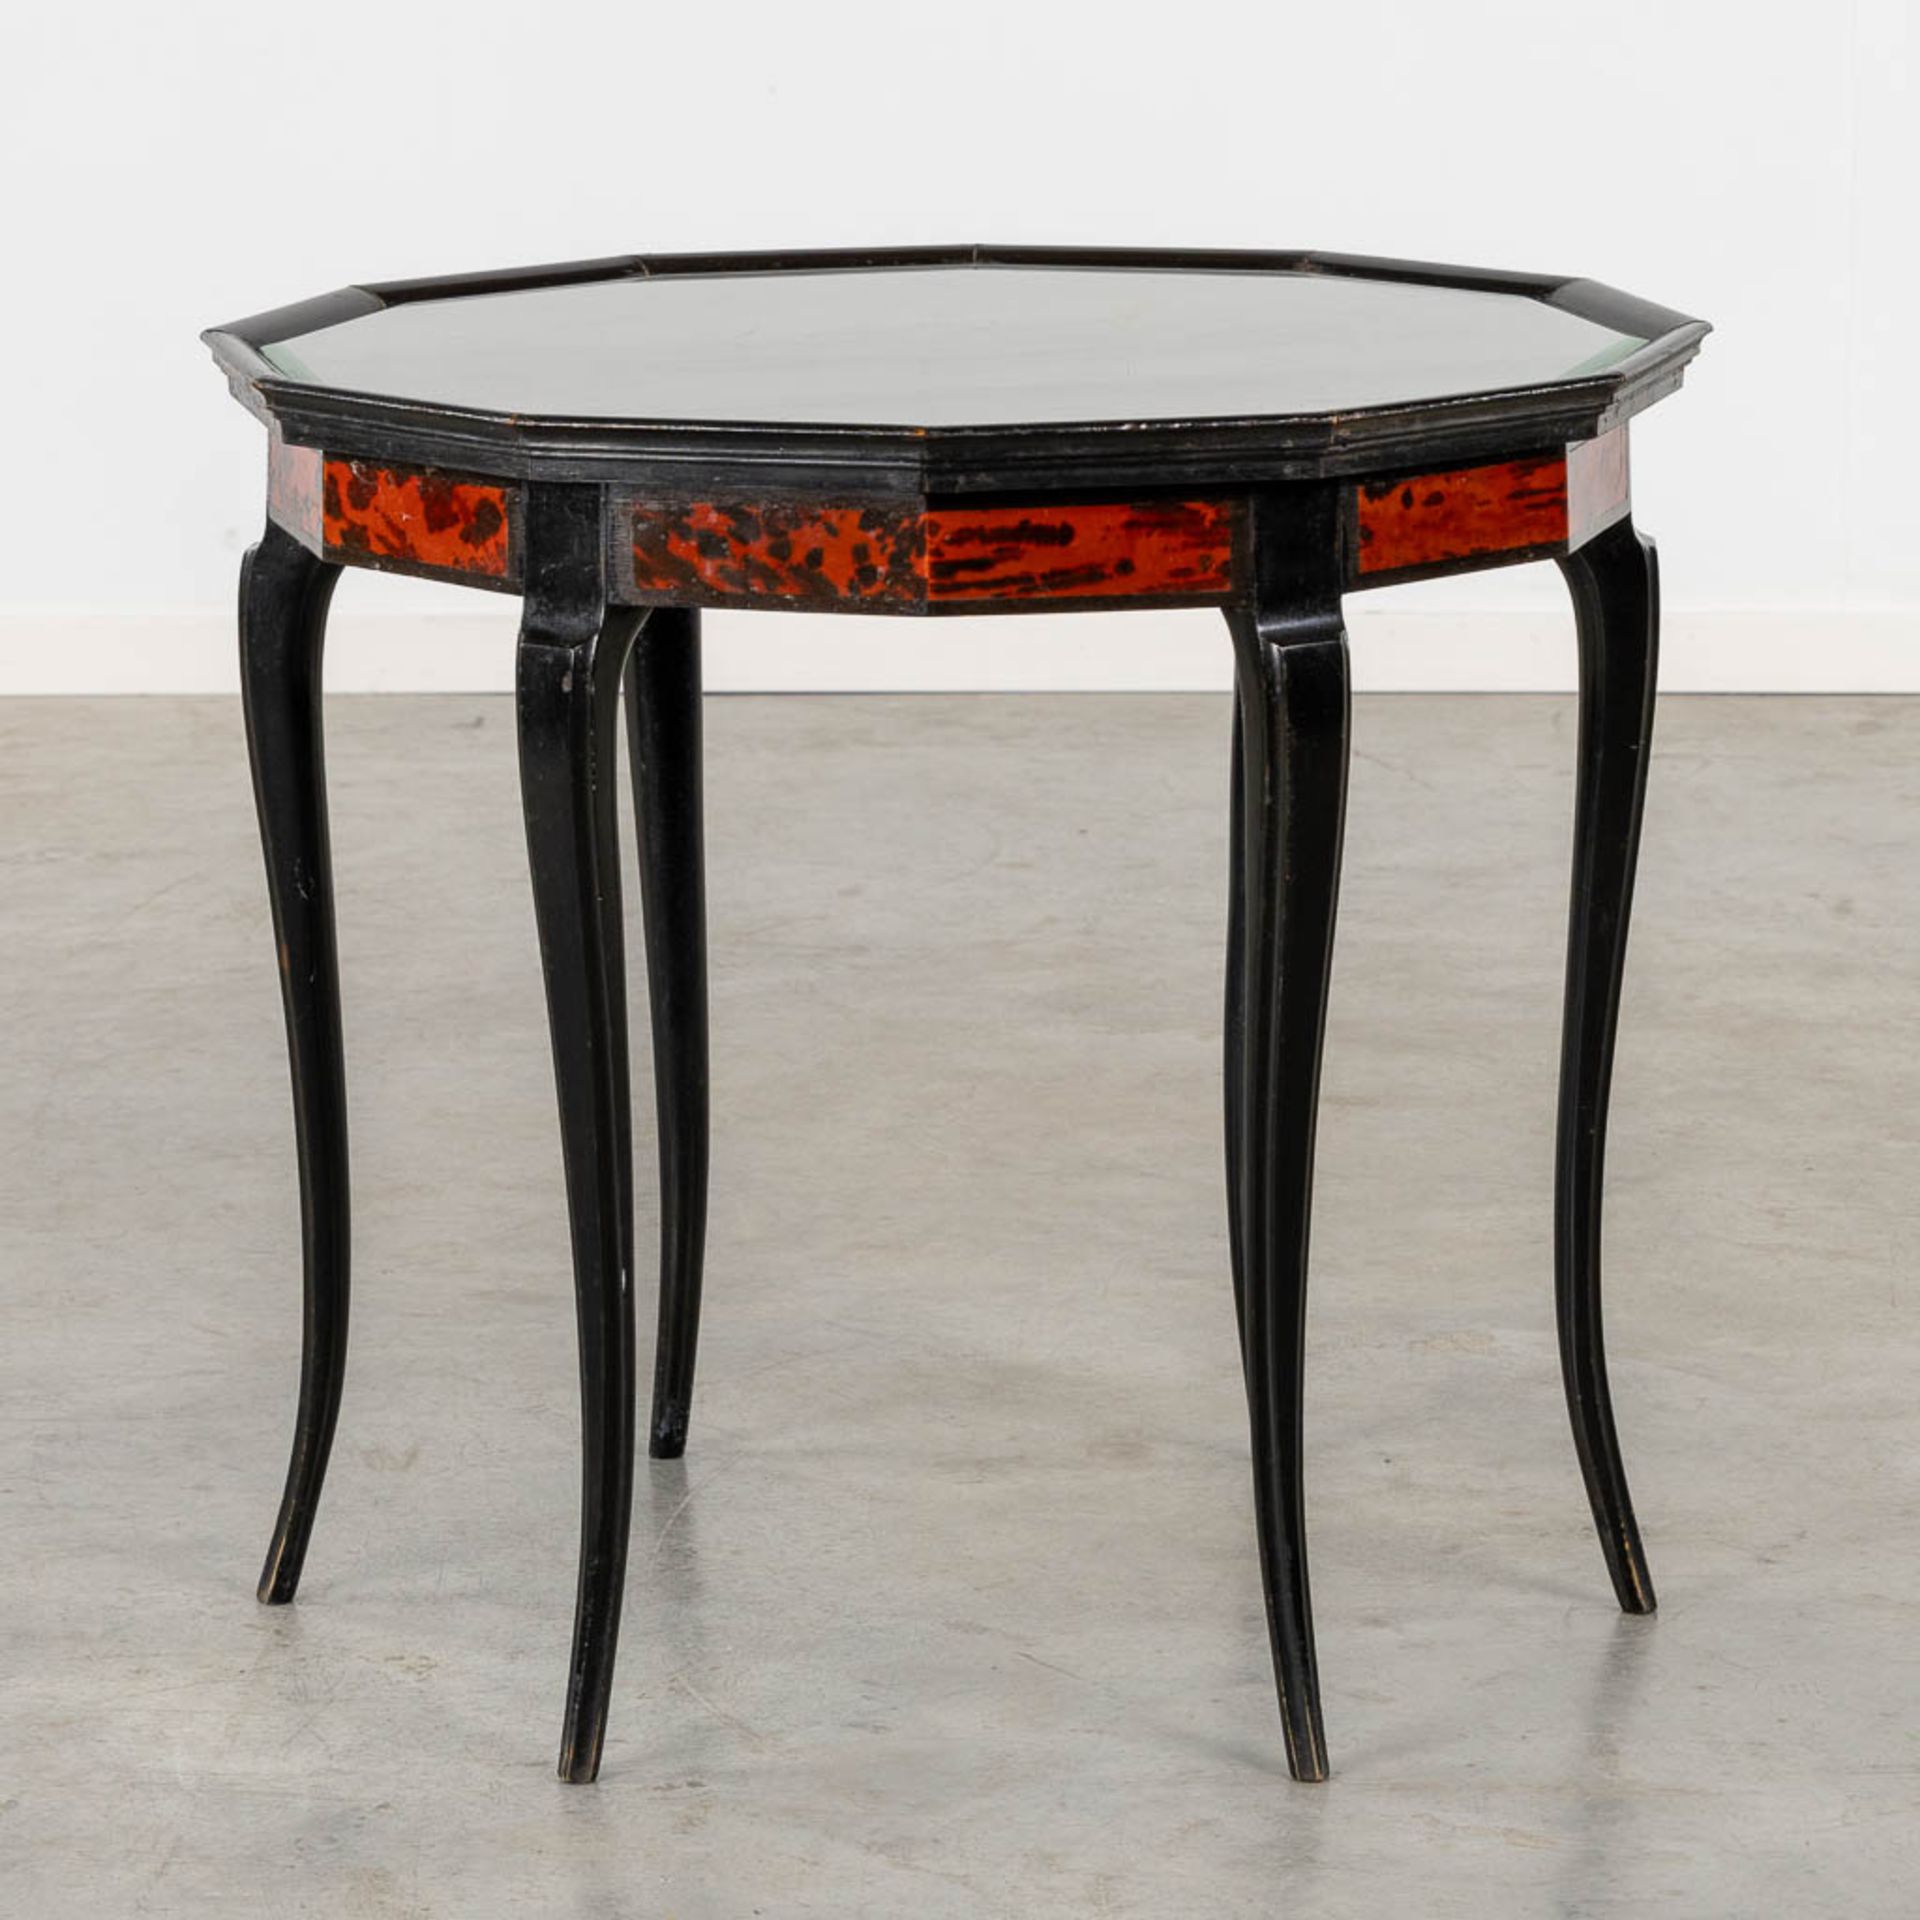 Maison Franck, Antwerp, an octagonal side table, tortoise shell and ebonised wood. (H:65 x D:72 cm) - Image 7 of 8